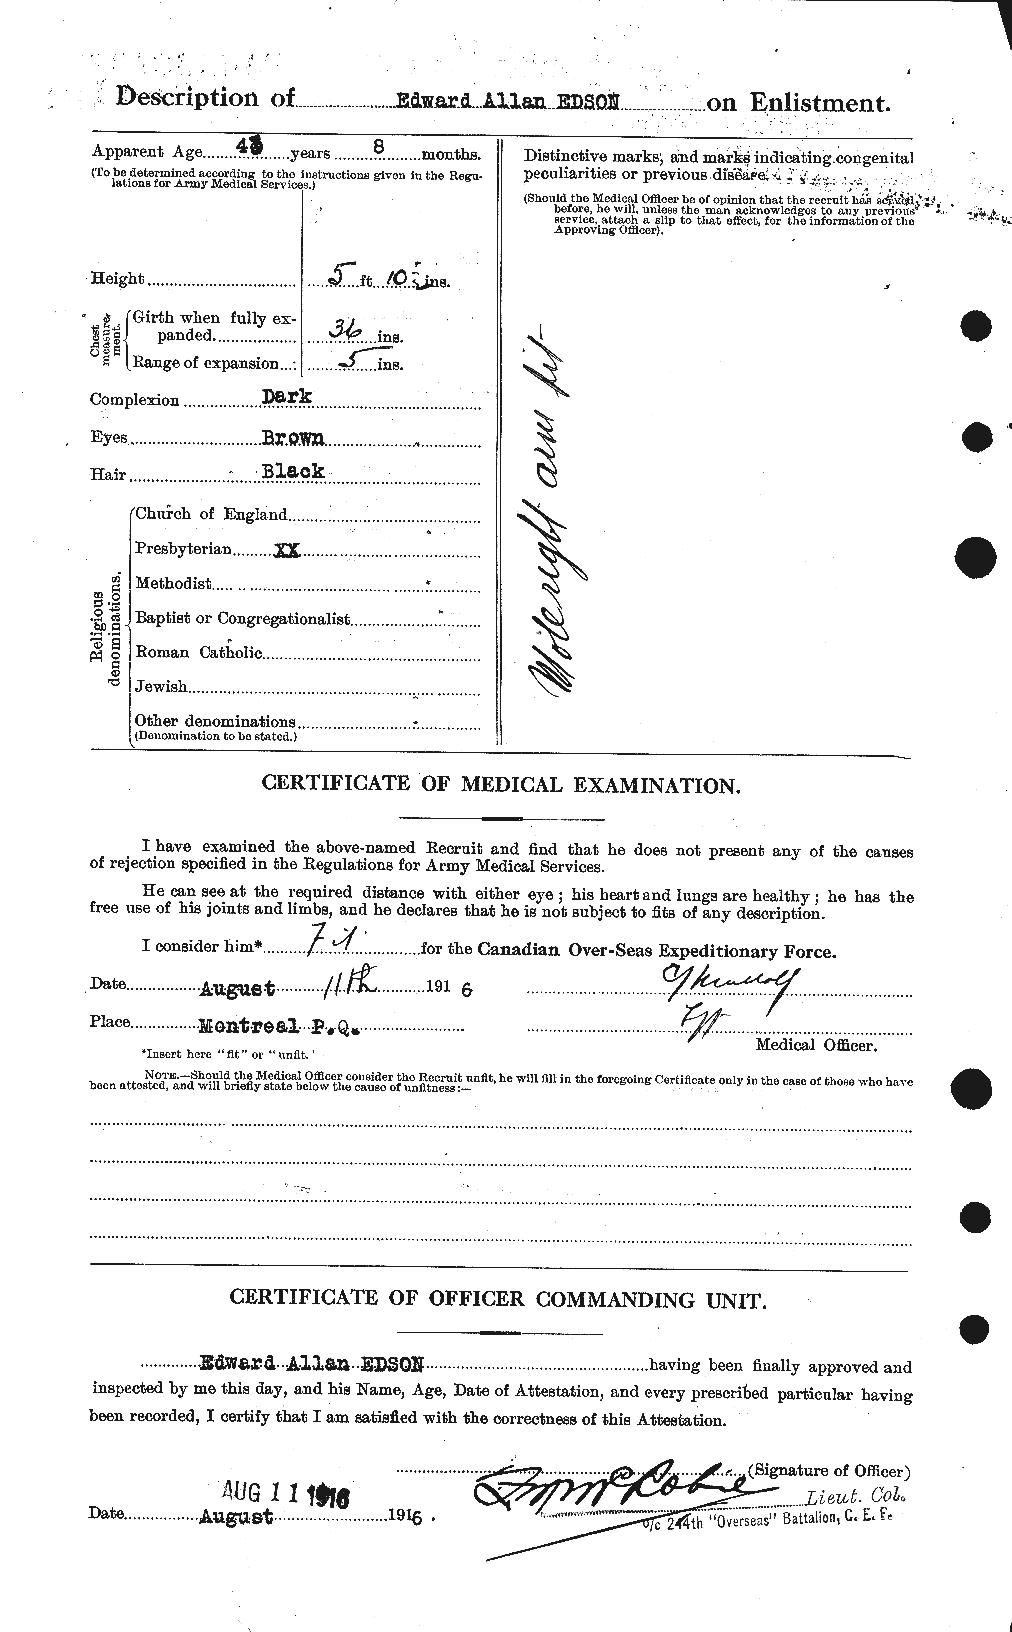 Personnel Records of the First World War - CEF 313033b